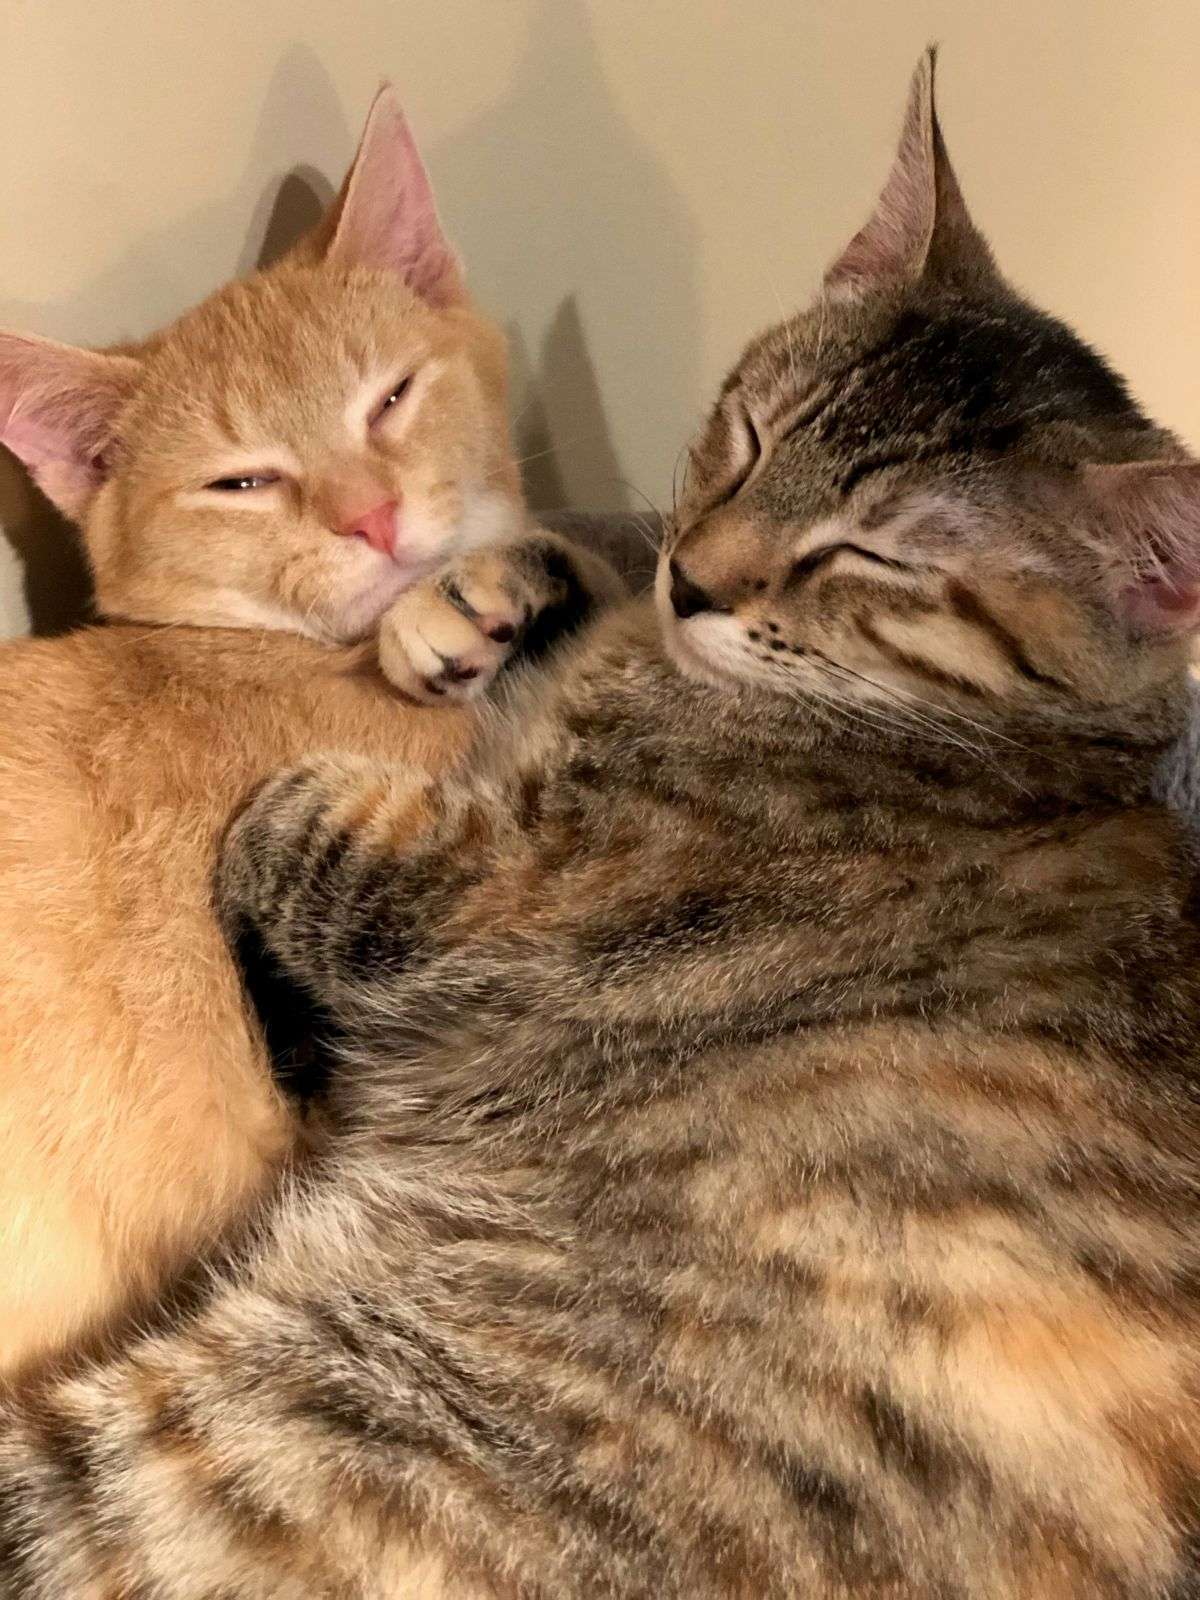 two tabby cats are sleepy and snuggly together.